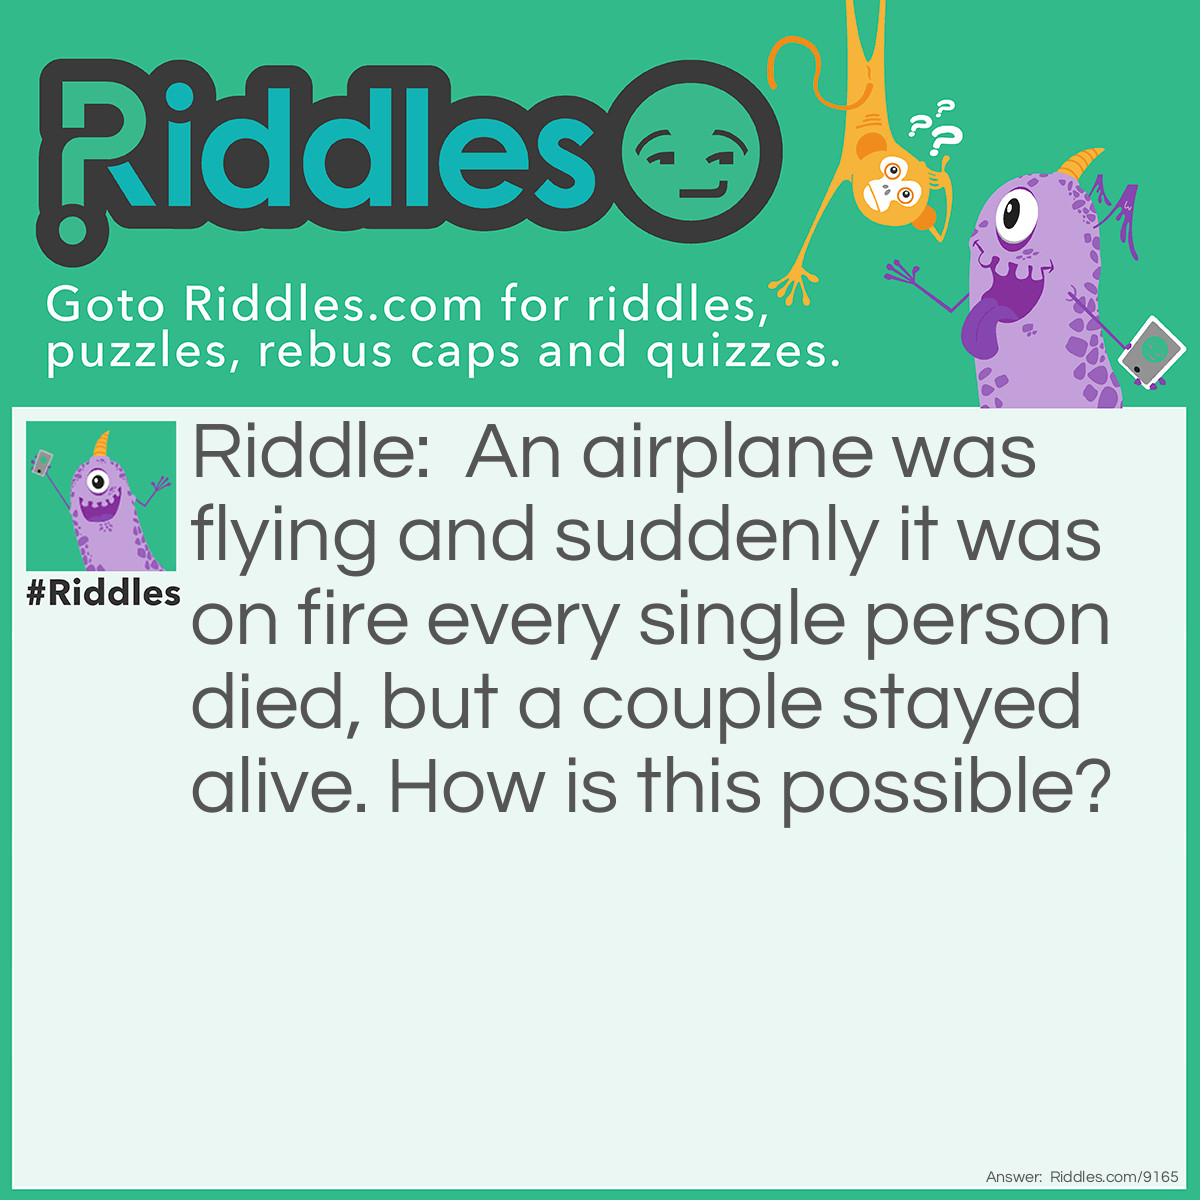 Riddle: An airplane was flying and suddenly it was on fire every single person died, but a couple stayed alive. How is this possible? Answer: Every SINGLE person died, as in they were single.